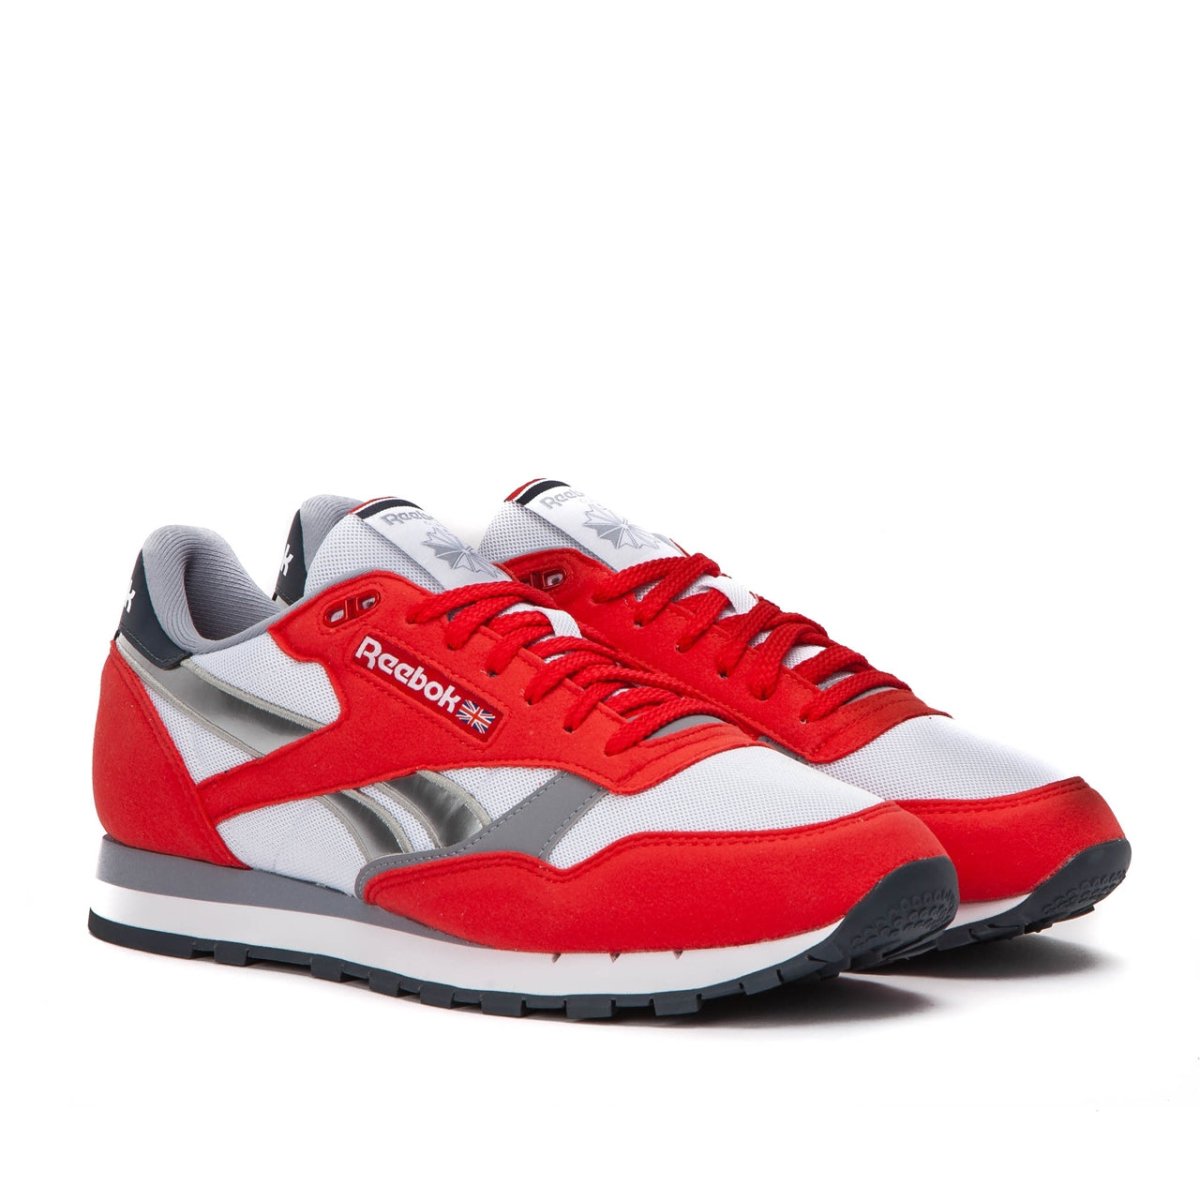 Reebok Classic Leather (Rot / Silber)  - Allike Store